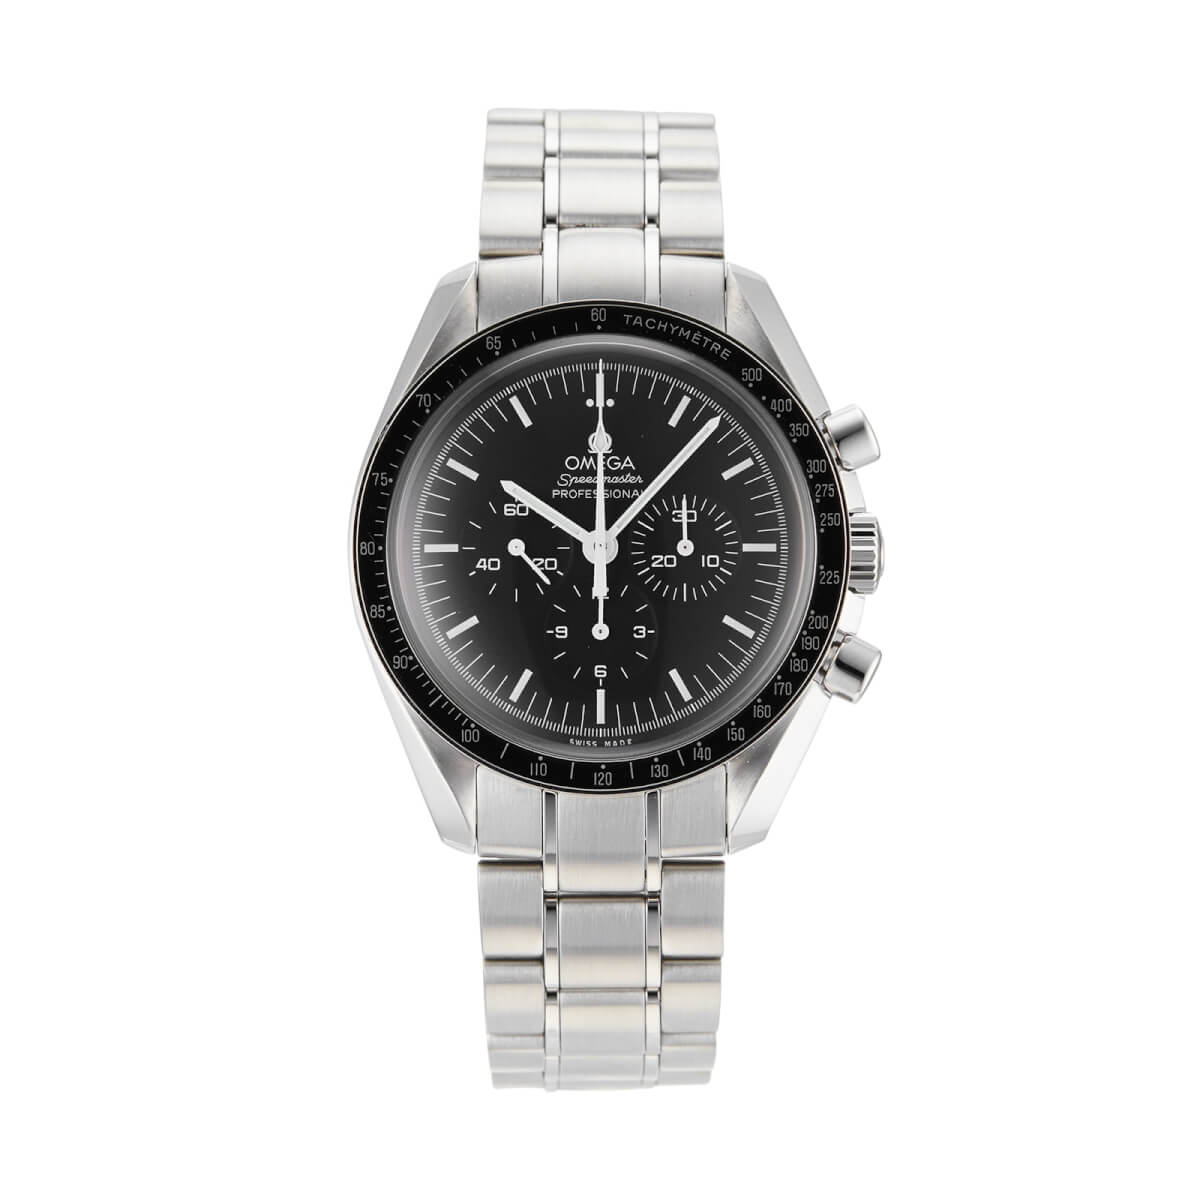 Pre-Owned OMEGA Speedmaster Moonwatch Professional Chronograph 42mm Mens Watch 311.30.42.30.01.005